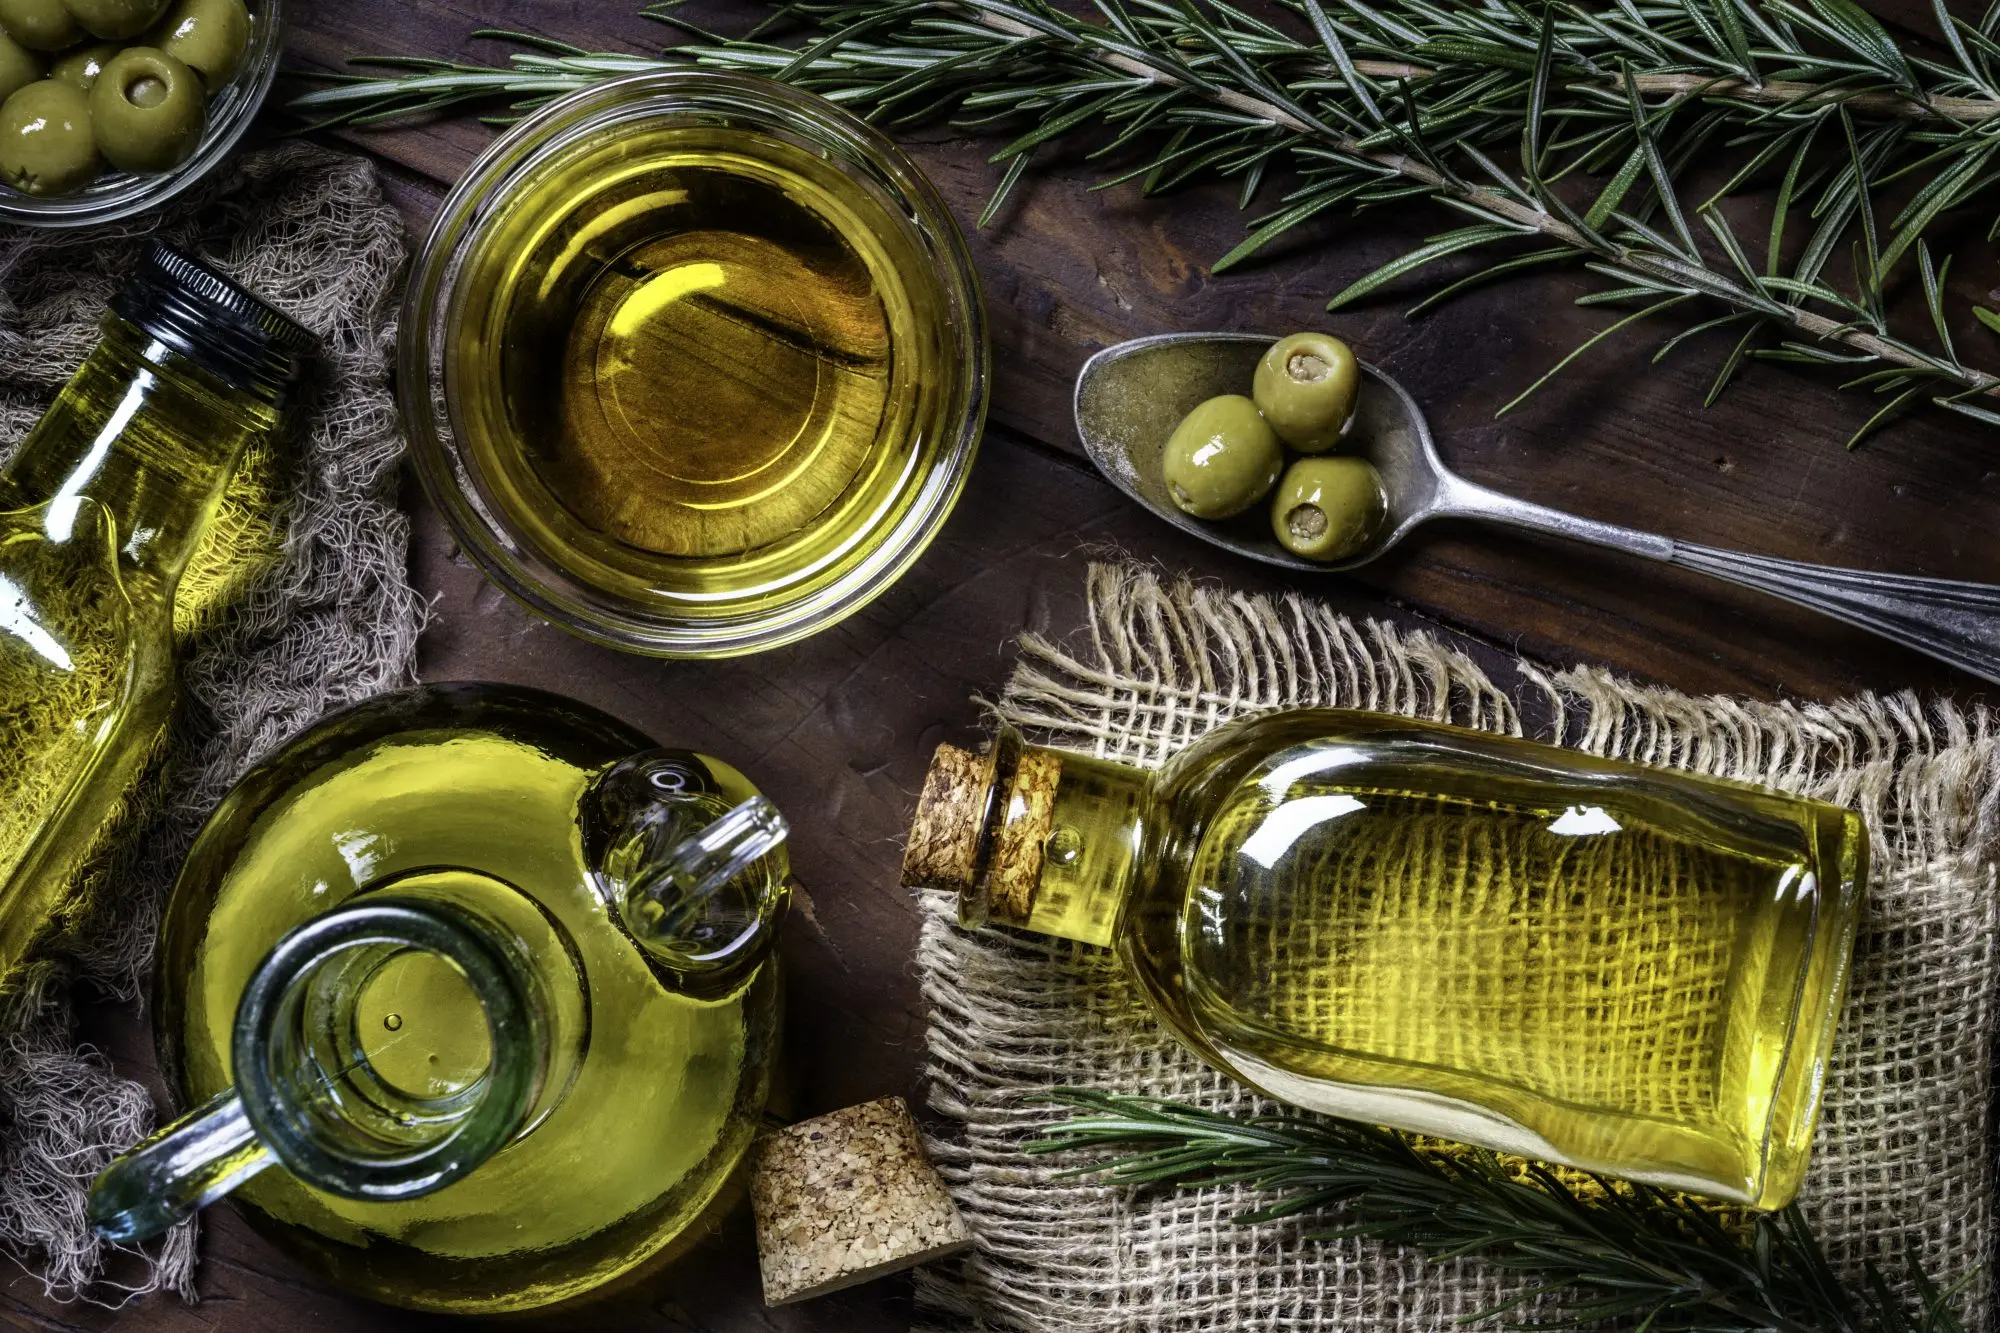 20 оливковое масло. Olive Oil масло оливковое. Oliva Extra Virgin Olive Oil. Оливки и оливковое масло. Итальянское оливковое масло.